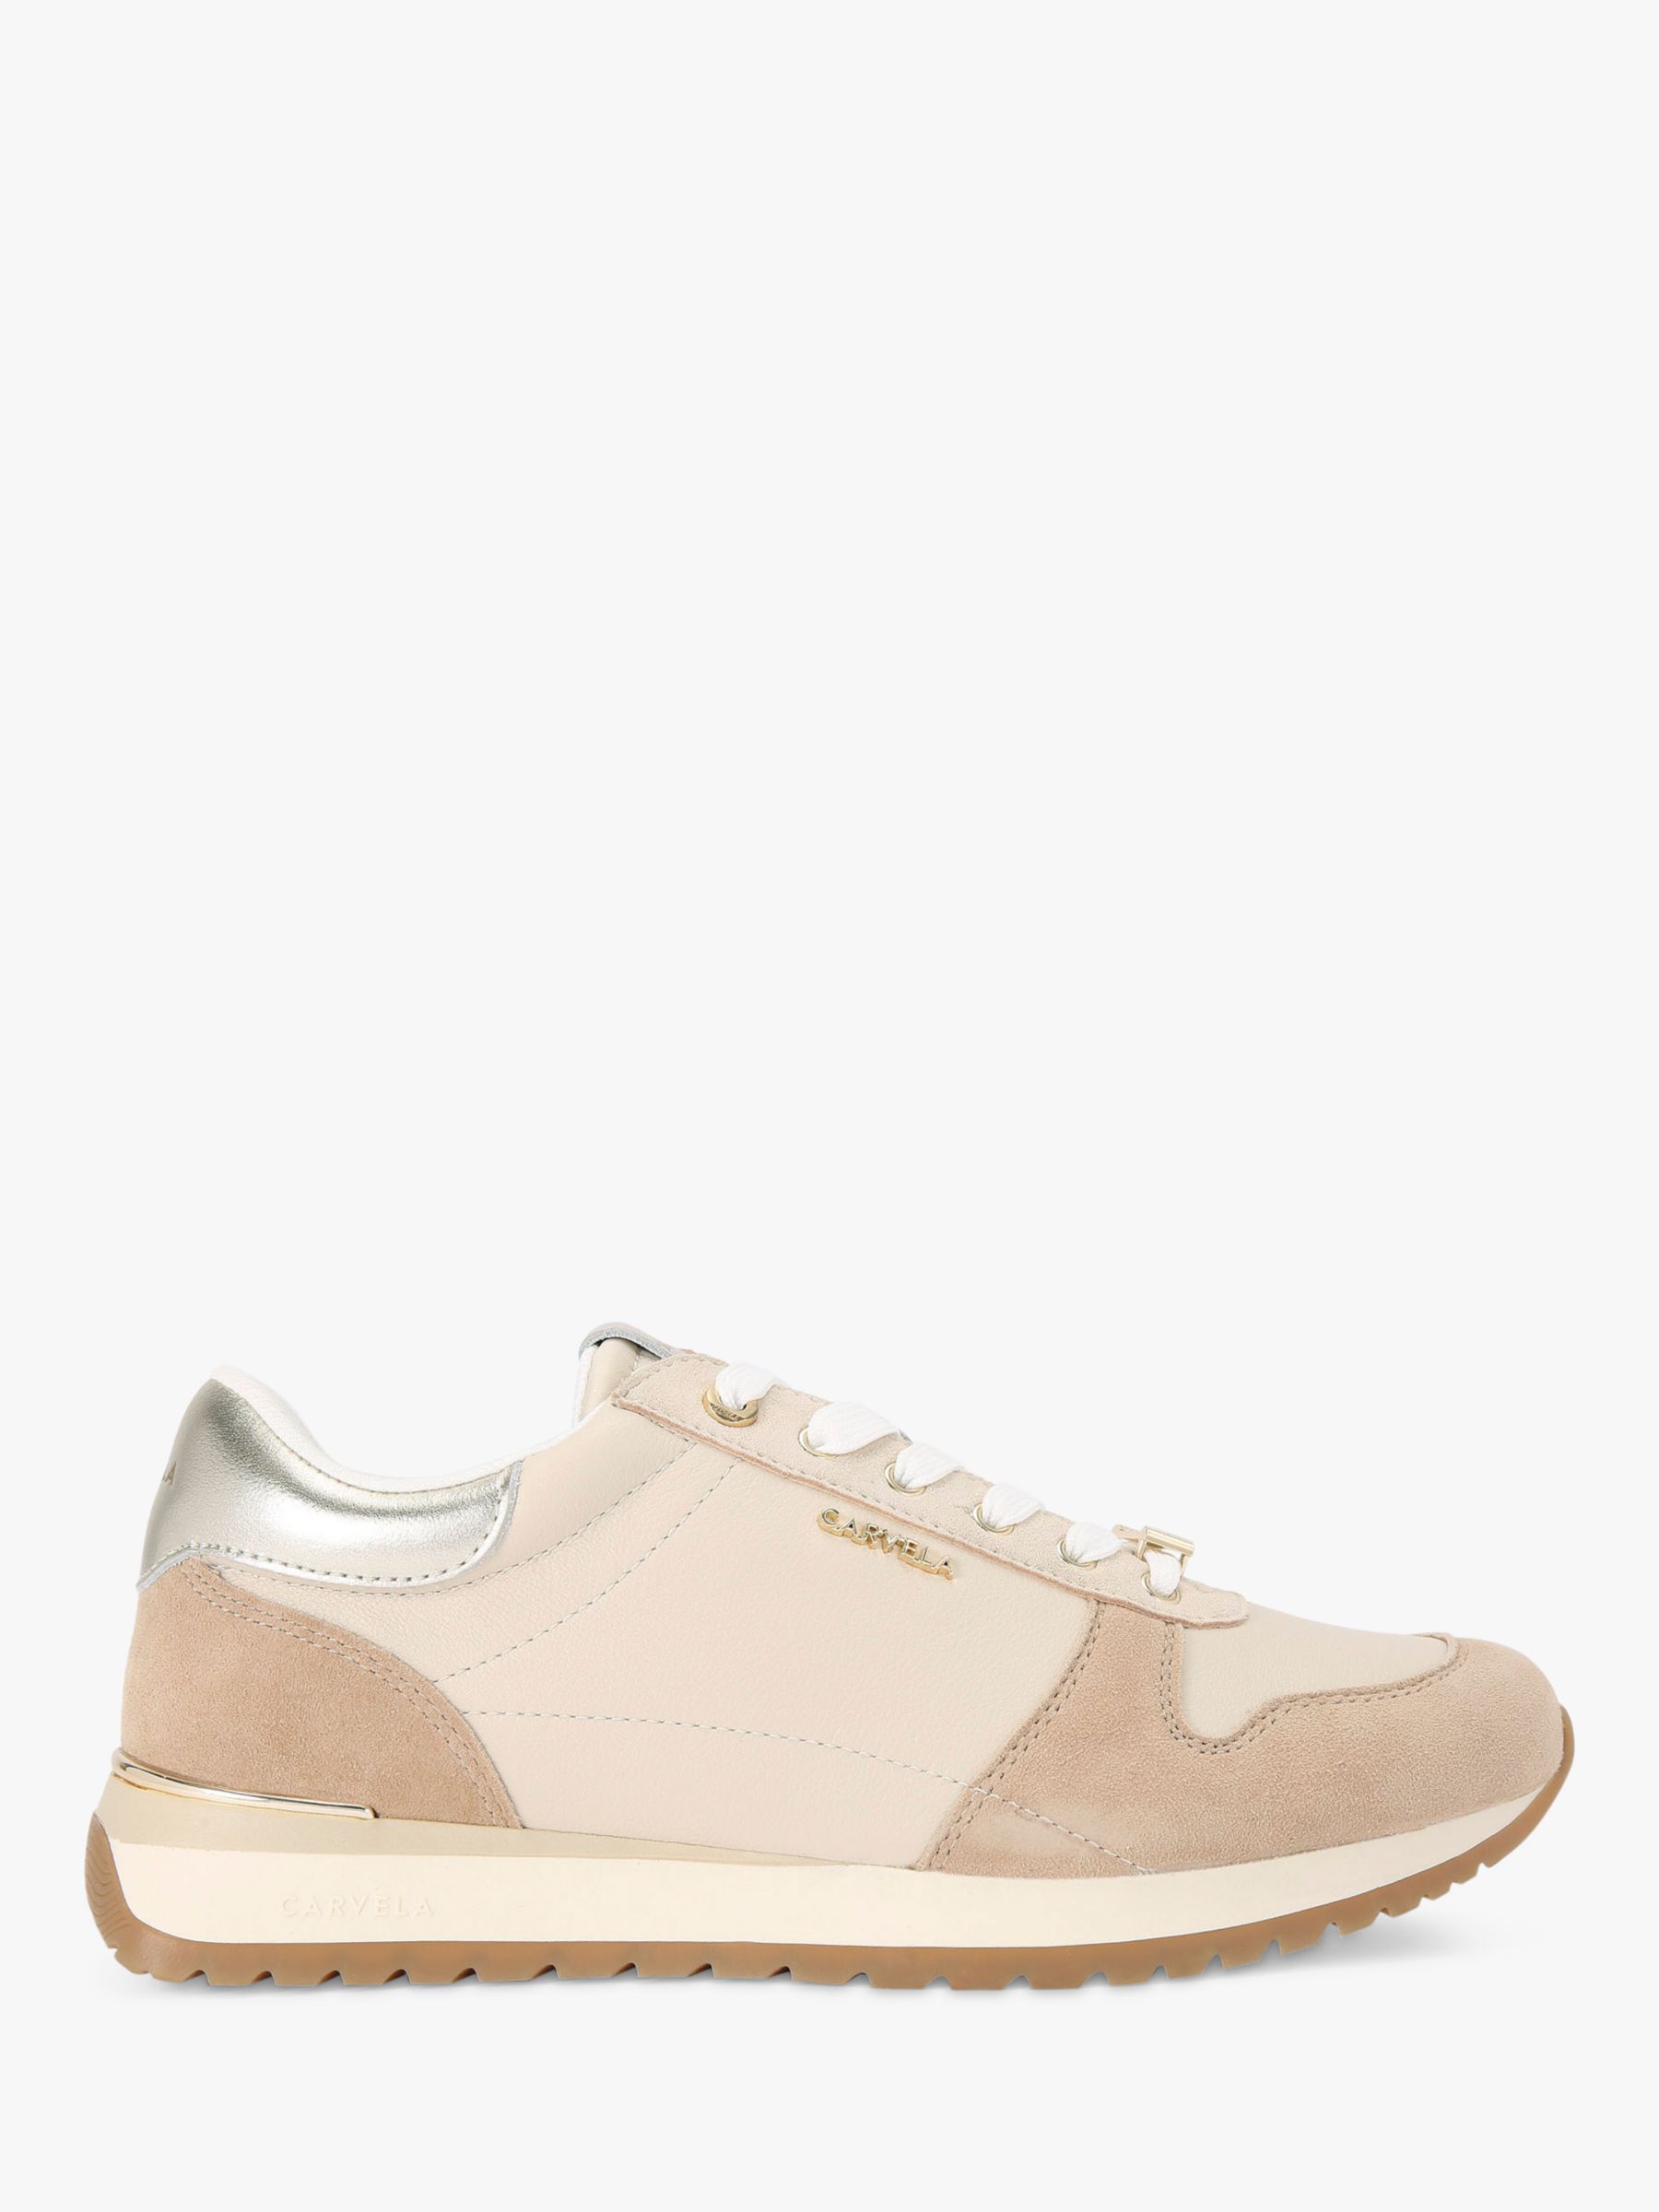 Carvela Track Star Trainers, Taupe at John Lewis & Partners